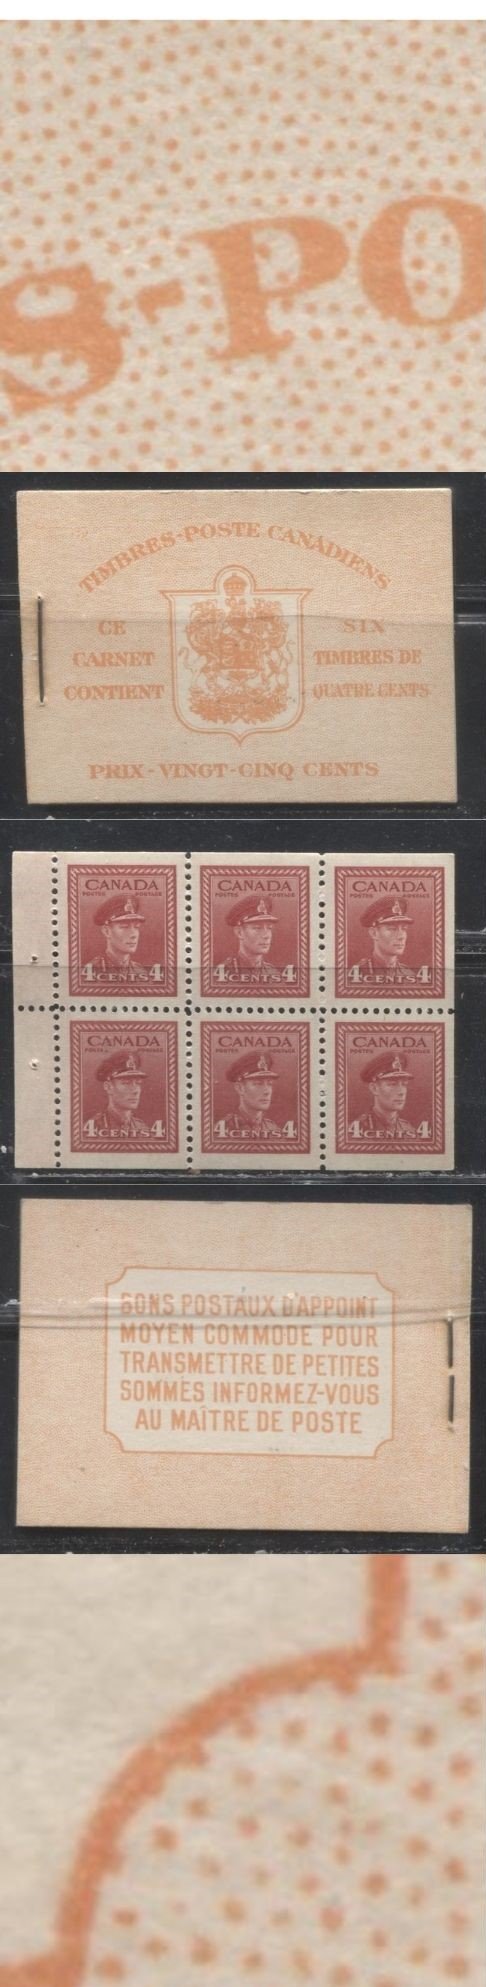 Lot 163 Canada #BK36d 1942-1949 War Issue, Complete 25¢ French Booklet, 1 Pane of 4c Carmine-Red, Horizontal Ribbed Paper, Harris Front Cover IIu, Back Cover Type Dii, 7c and 6c Rate Page